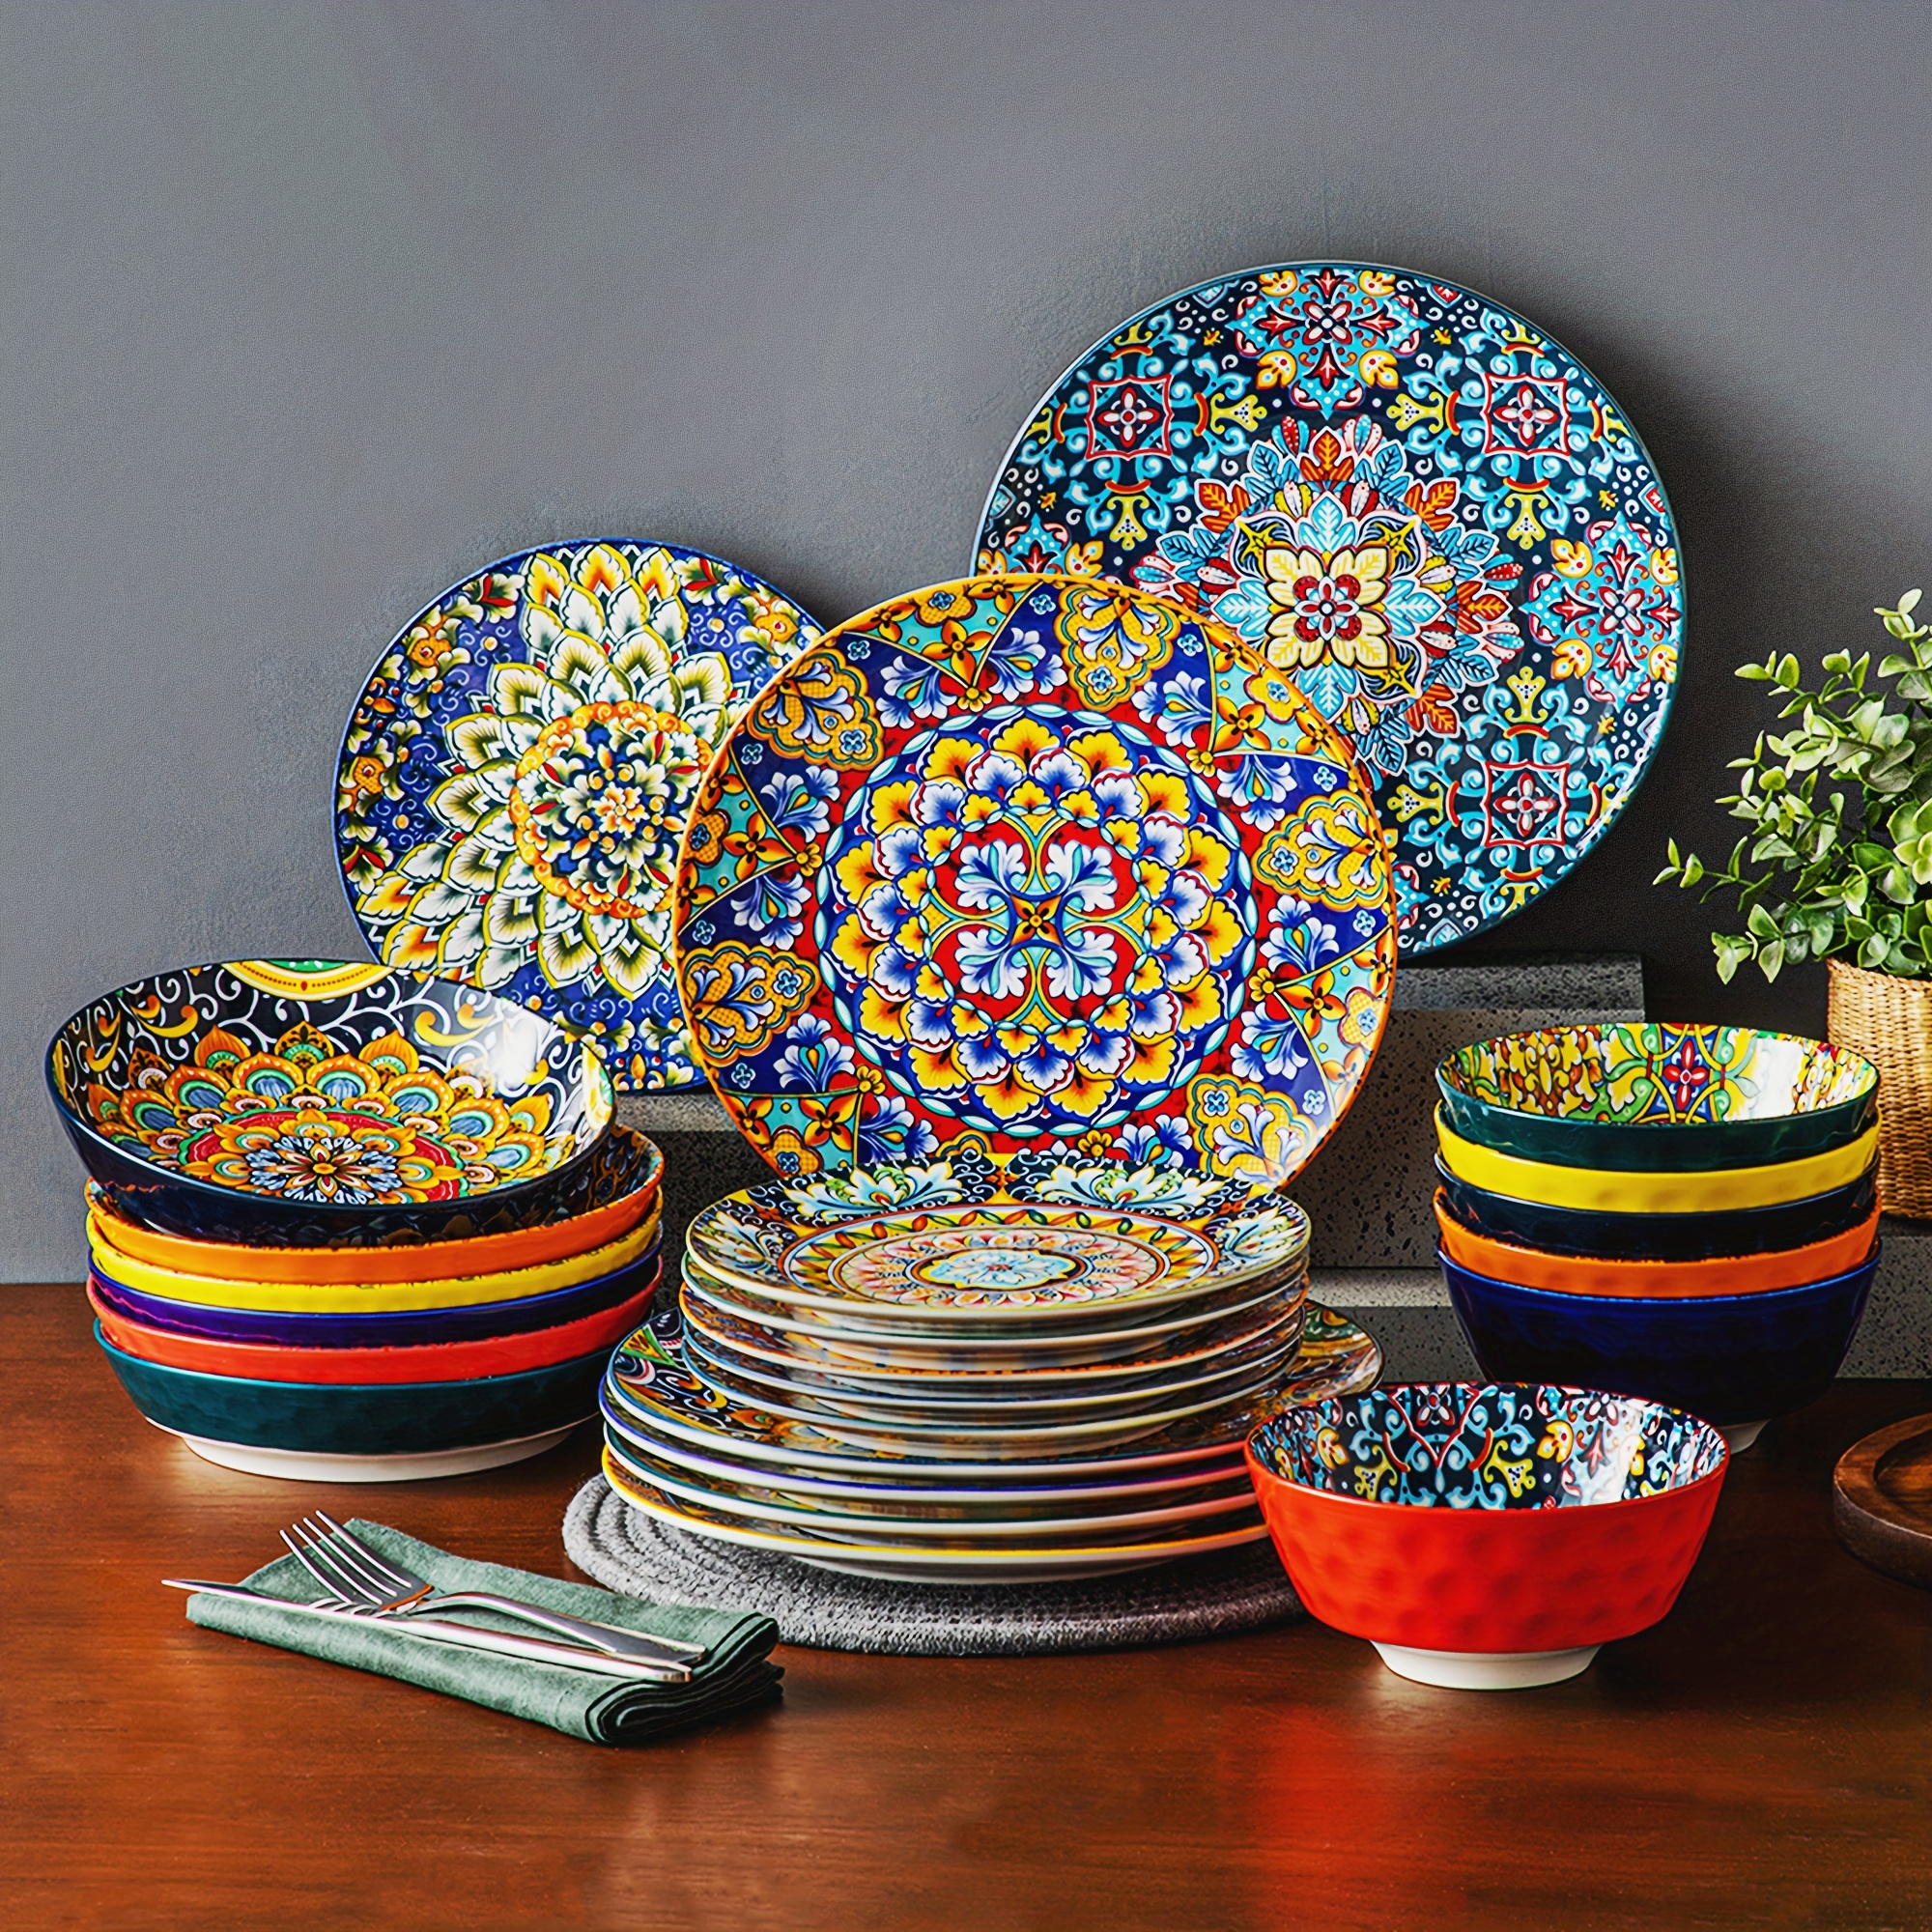 

16/24 Piece Bohemian Stoneware Dinnerware Set Complete Tableware With Vibrant Cereal Bowls For Effortless Style Vancasso